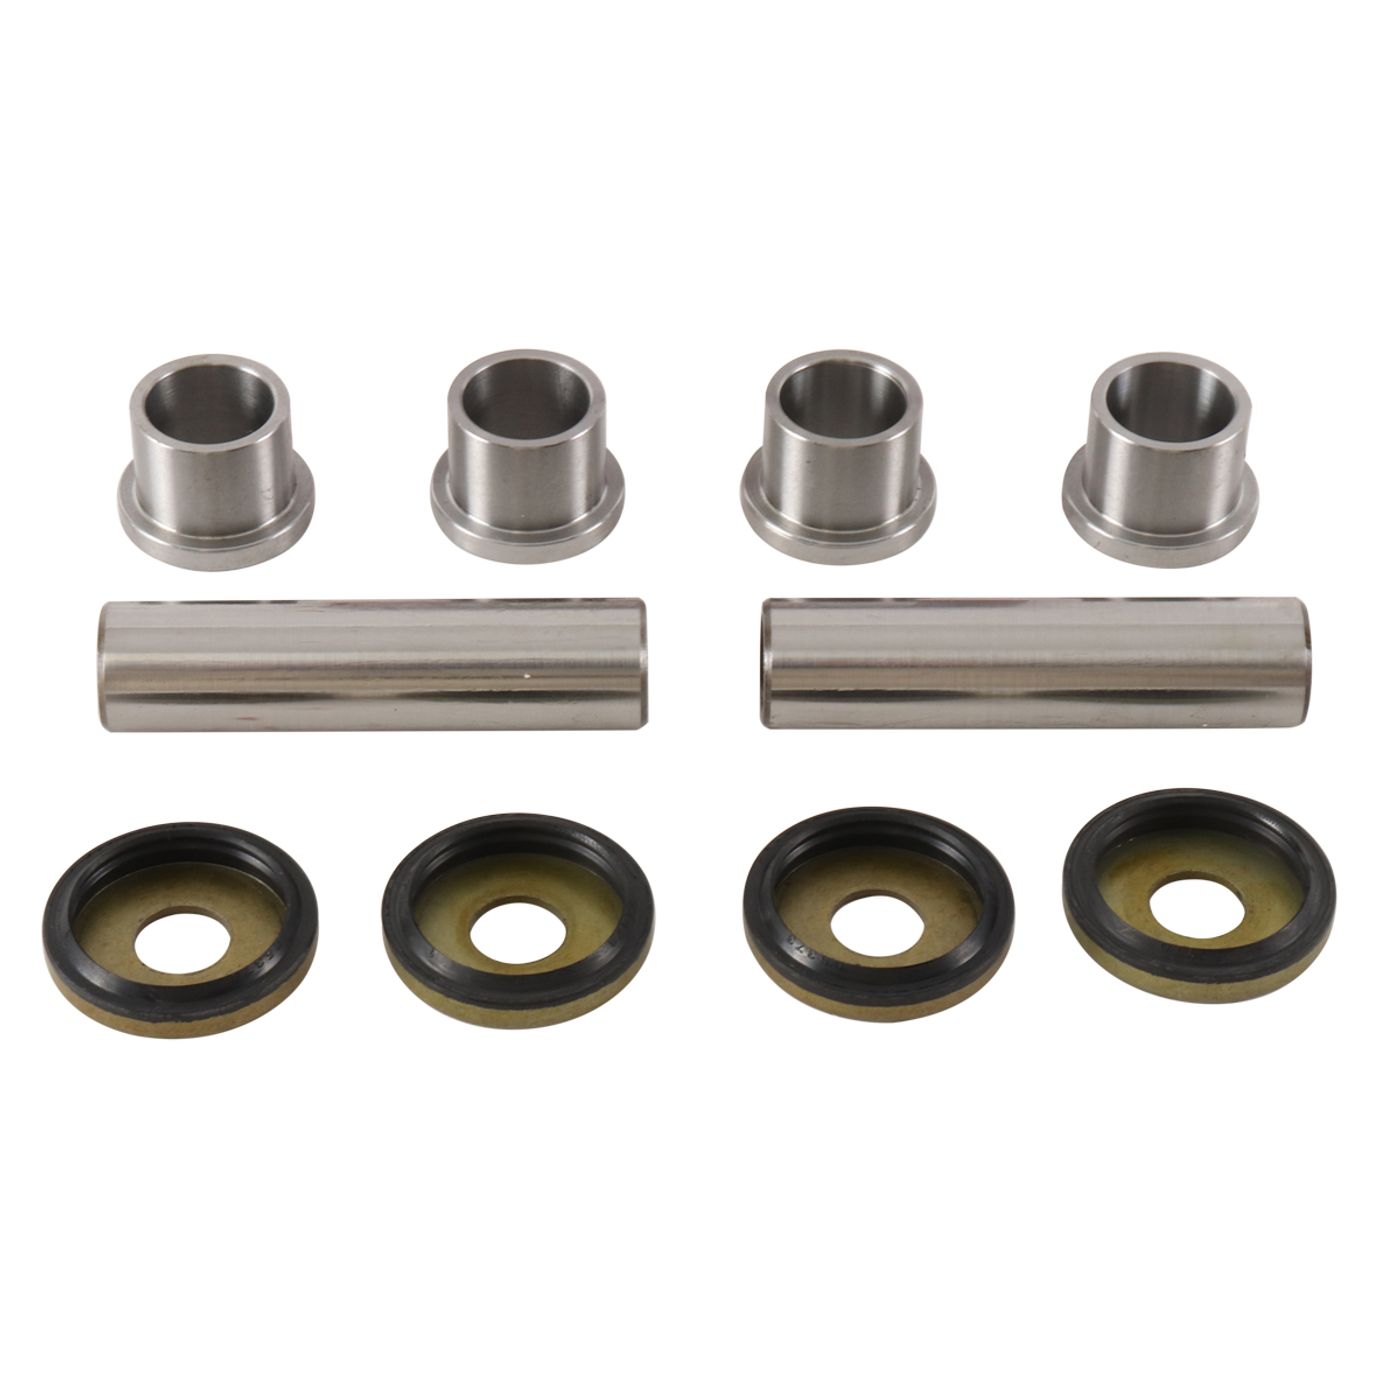 Wrp Rear Ind. Suspension Kits - WRP501181-K image